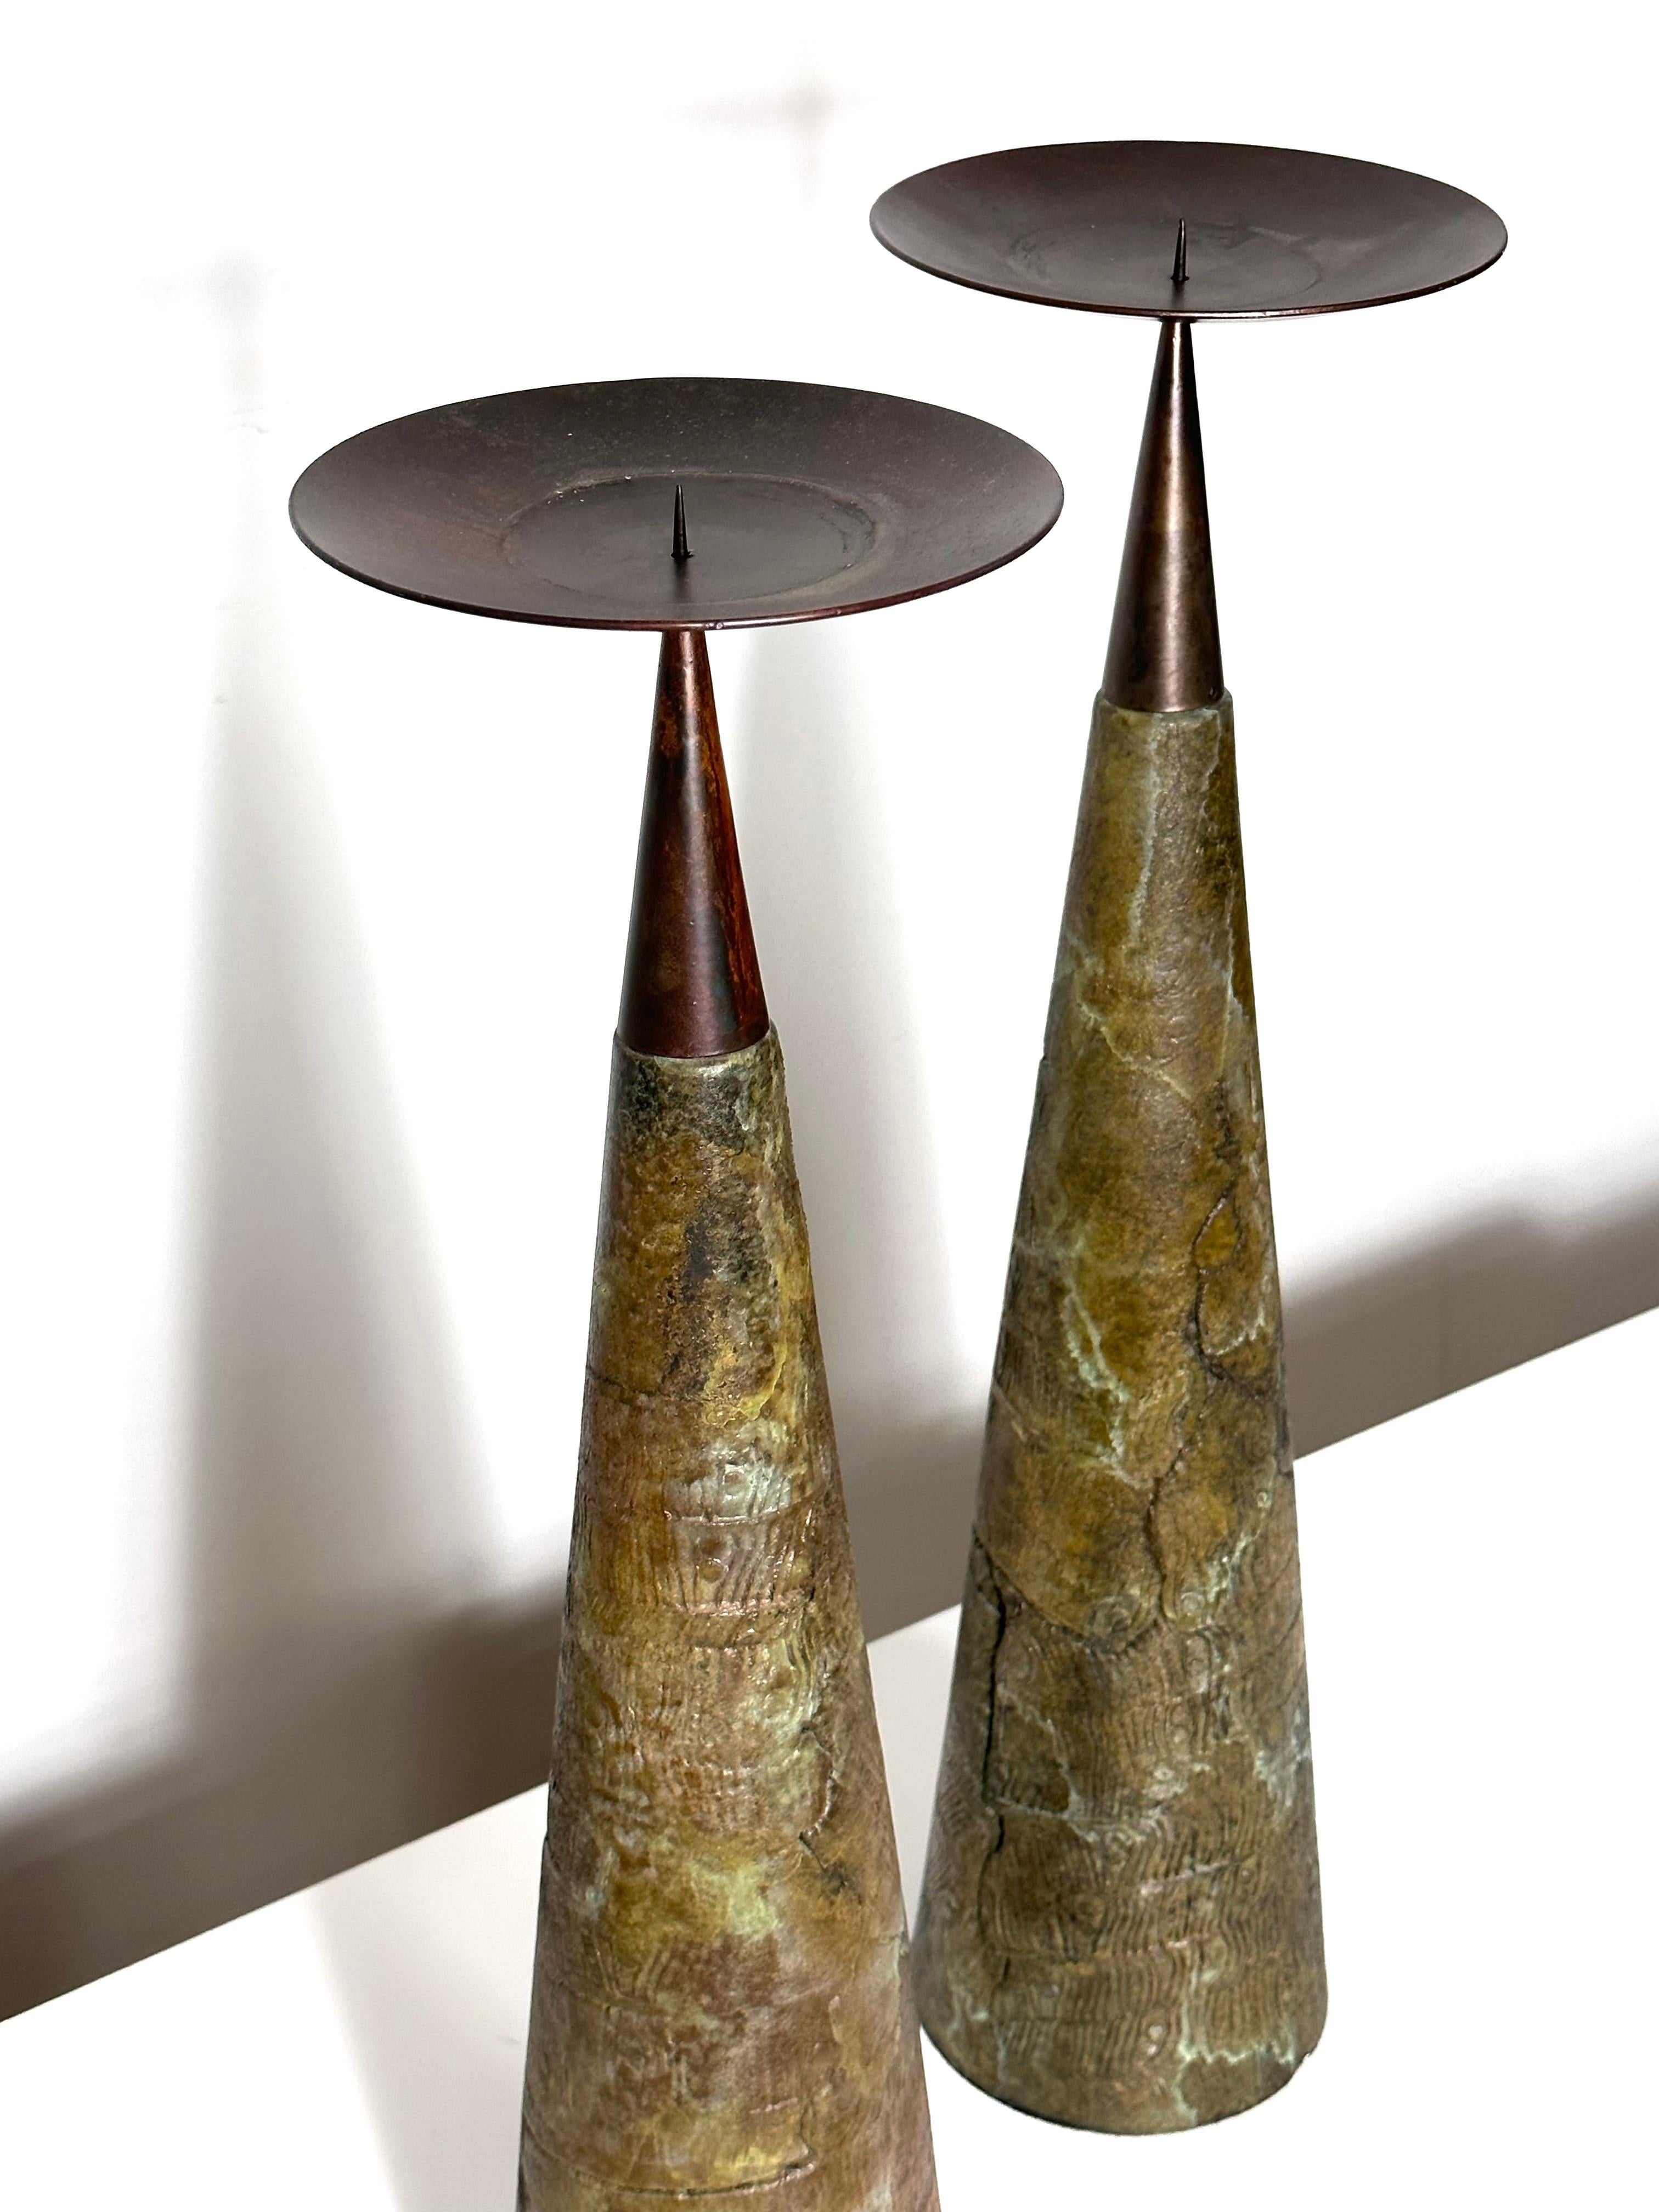 Monumental Pair of Tony Evans Ceramic Bronze Conical Pillar Candlesticks 1980s In Good Condition For Sale In Troy, MI